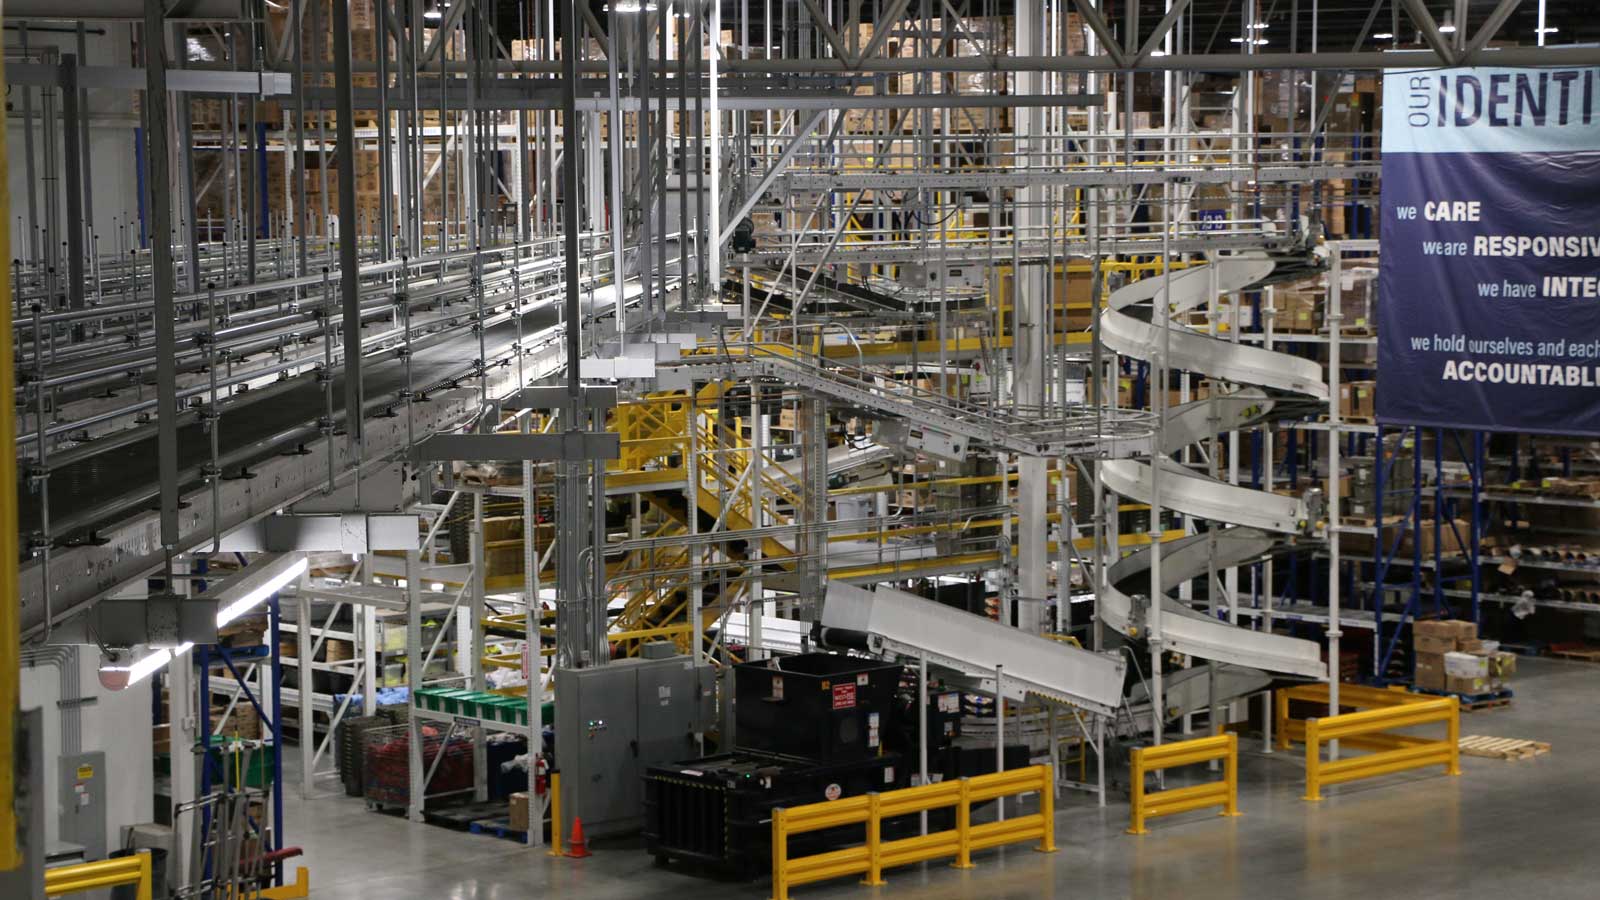 Belt and spiral conveyor system in a distribution warehouse